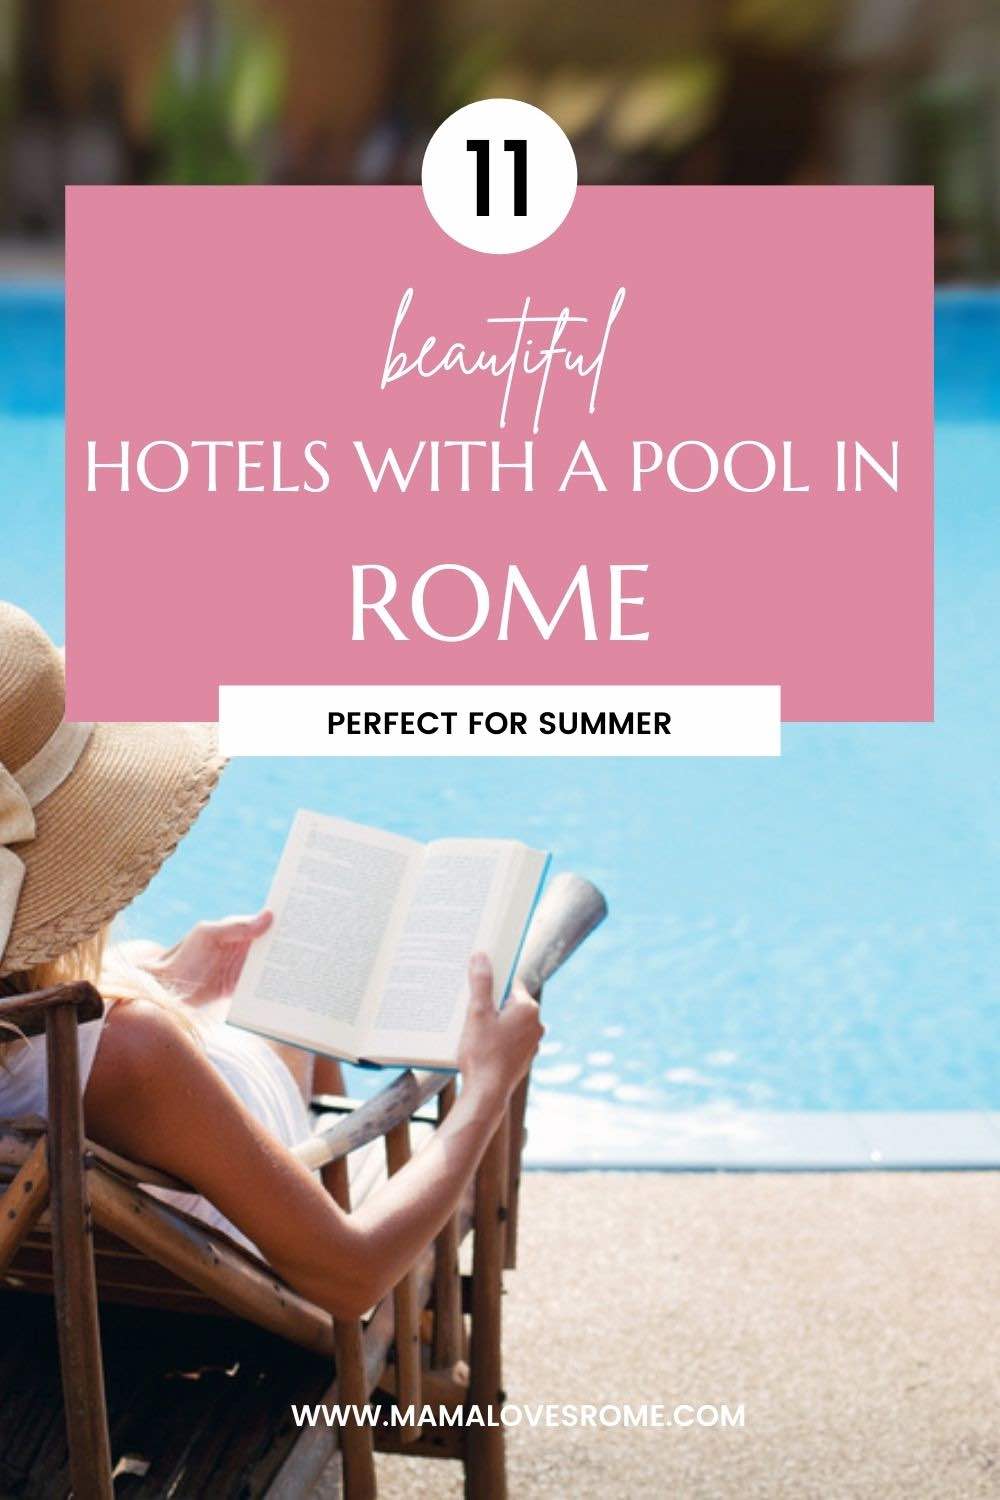 Woman wearing summer hat reading a book poolside with text: 11 beautiful hotels in Rome with pool perfect for summer